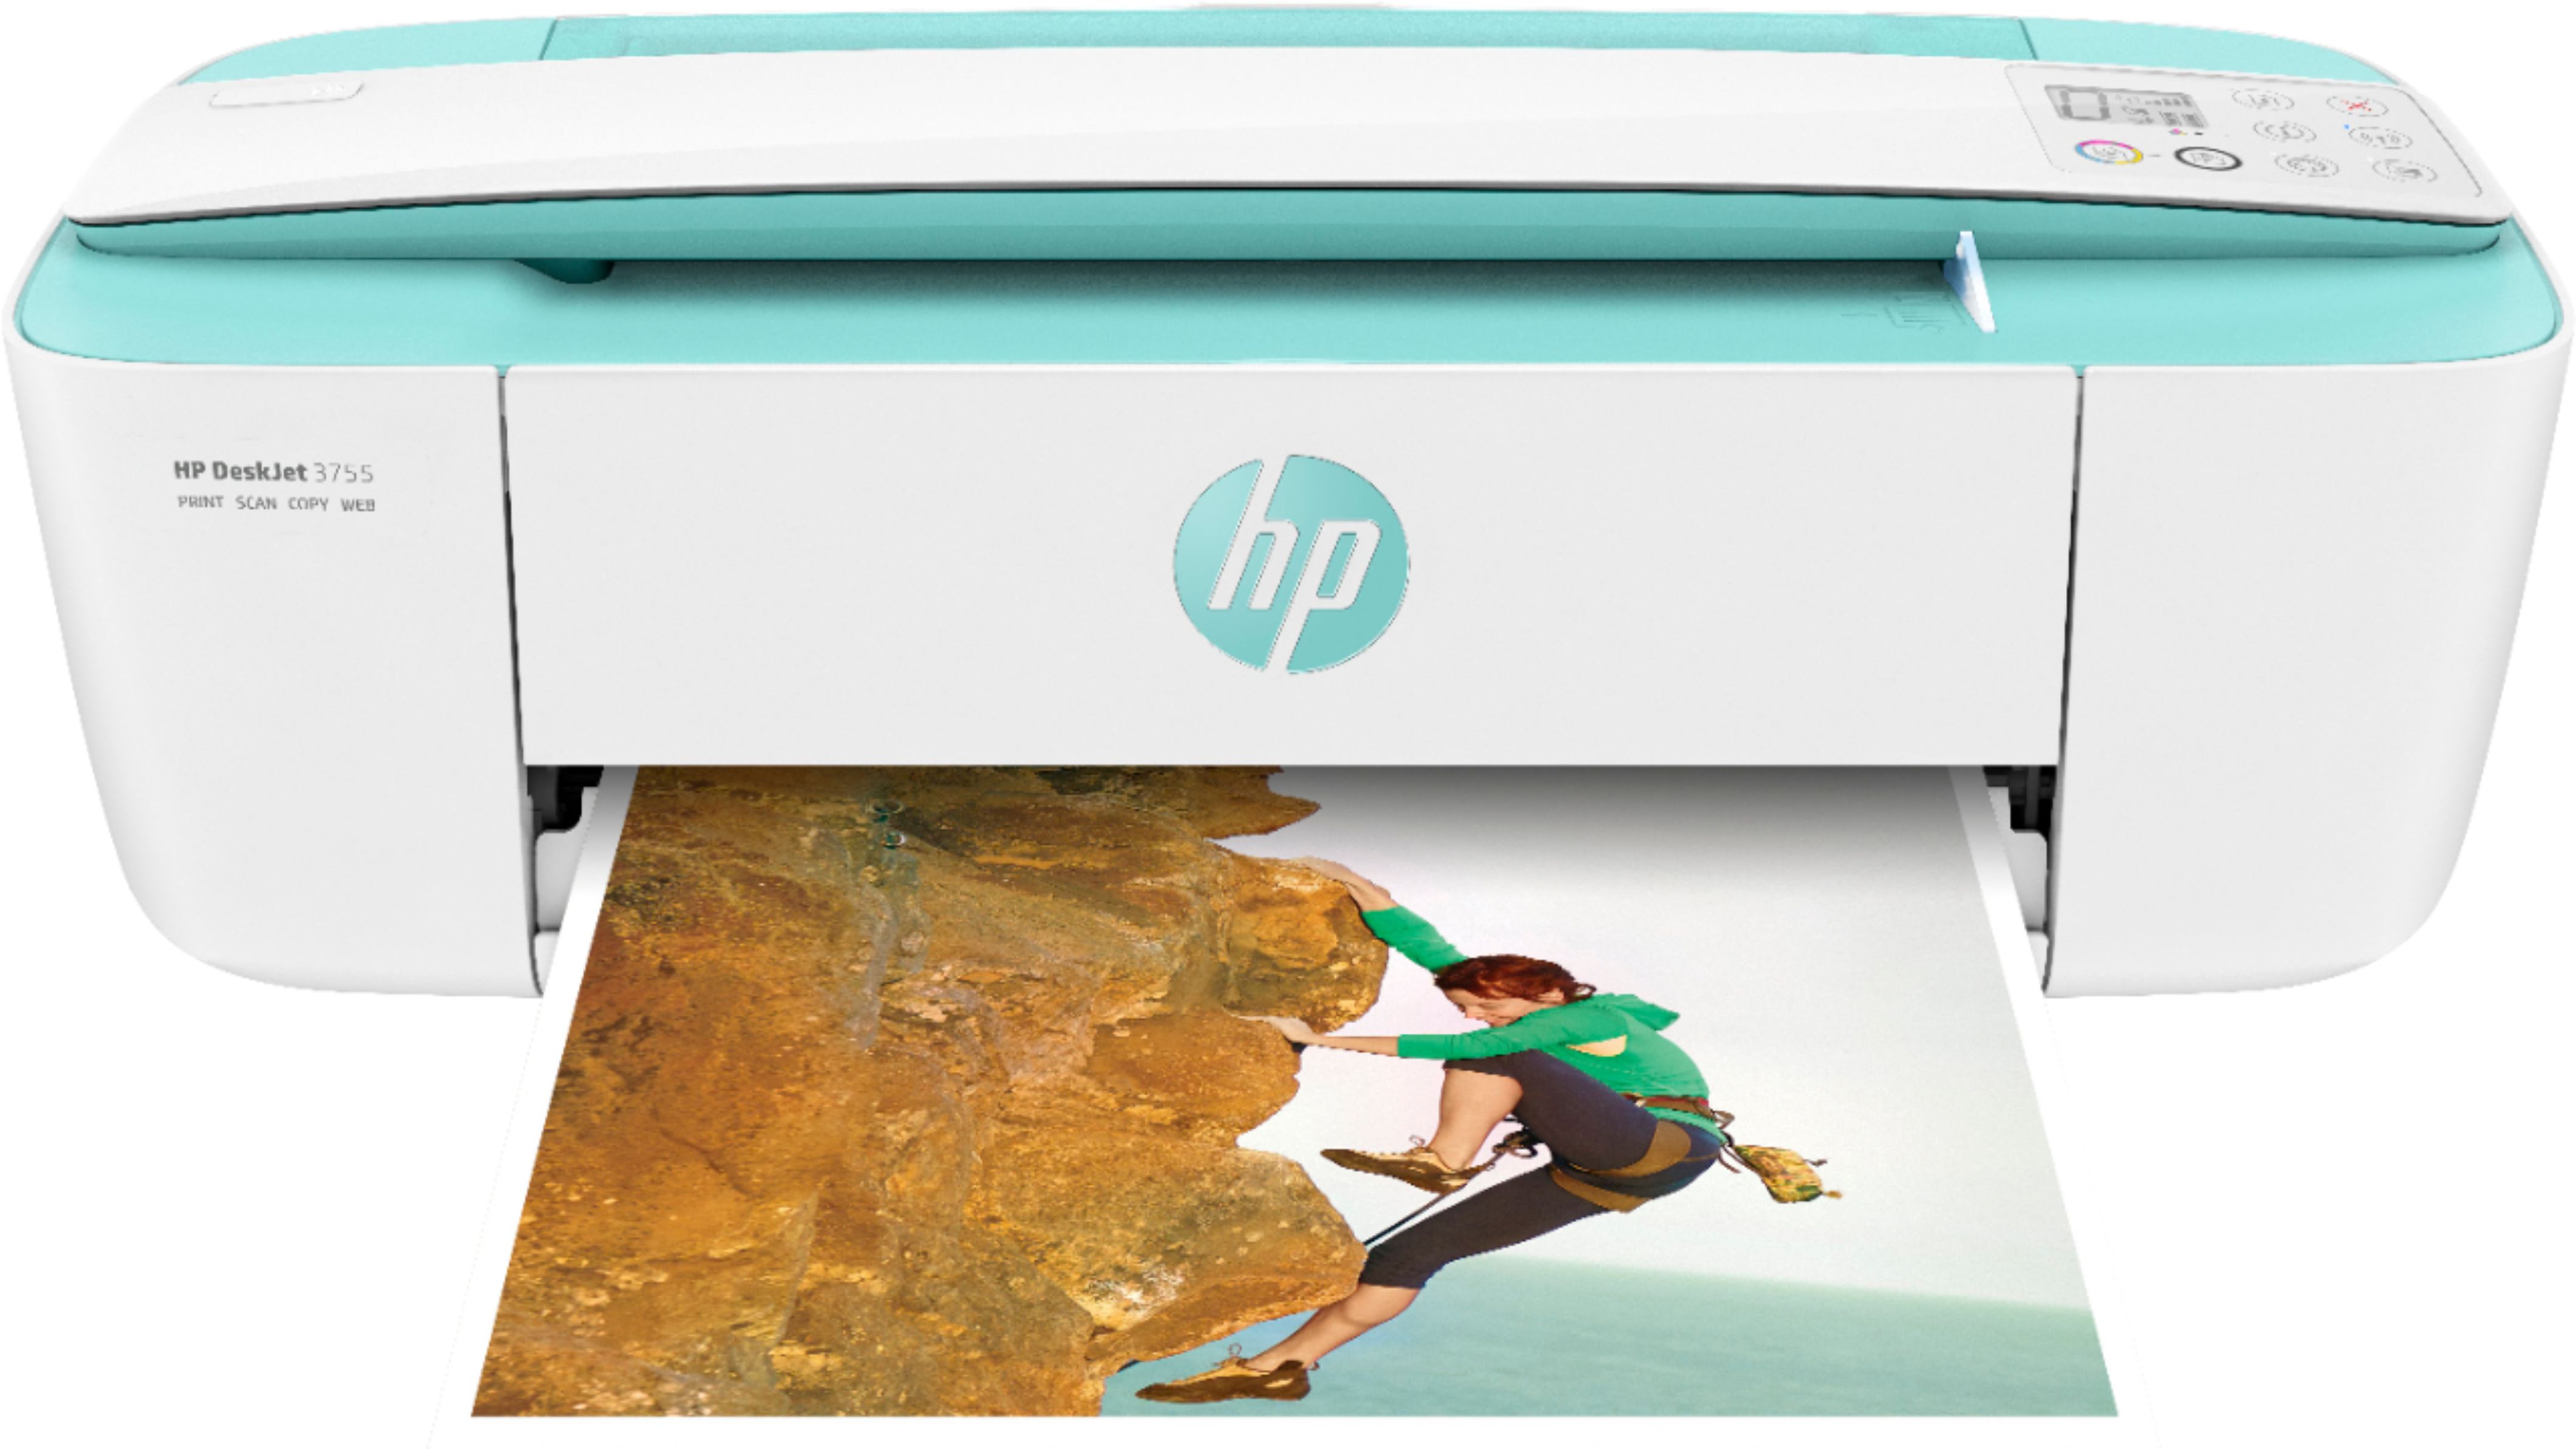 HP DeskJet 3755 All-in-One Instant Ink Ready Printer Seagrass J9V92A#B1H - Best Buy